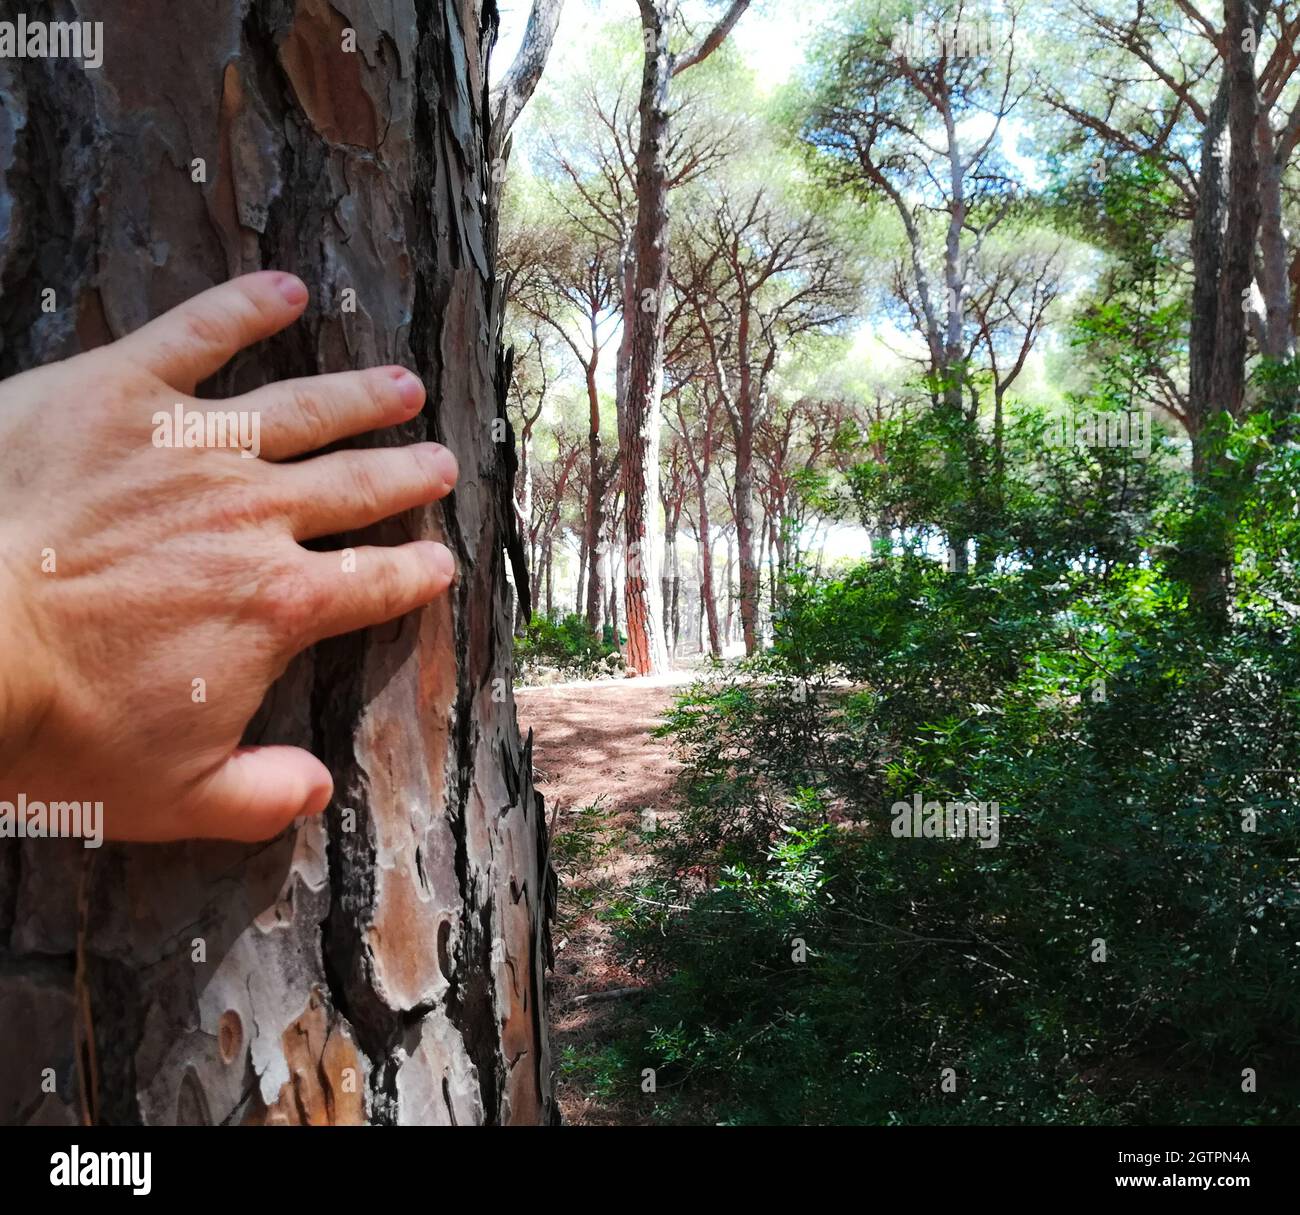 Cropped Hand Touching Tree Trunk In Forest Stock Photo